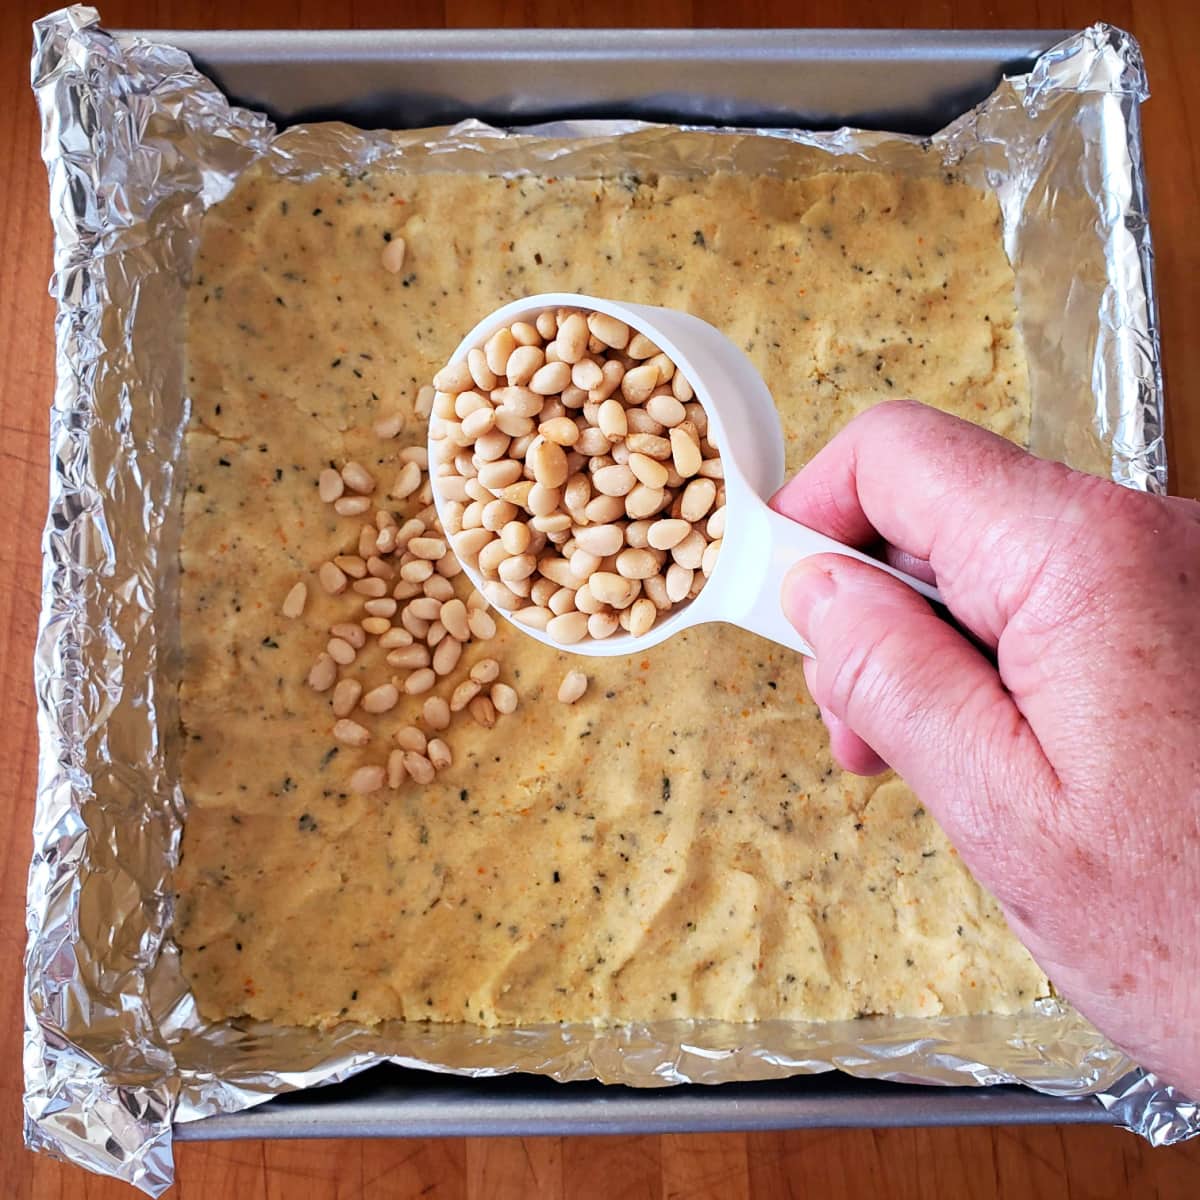 Hand holding a white measuring cup filled with pine nuts sprinkles the nuts on top of dough in silver baking dish